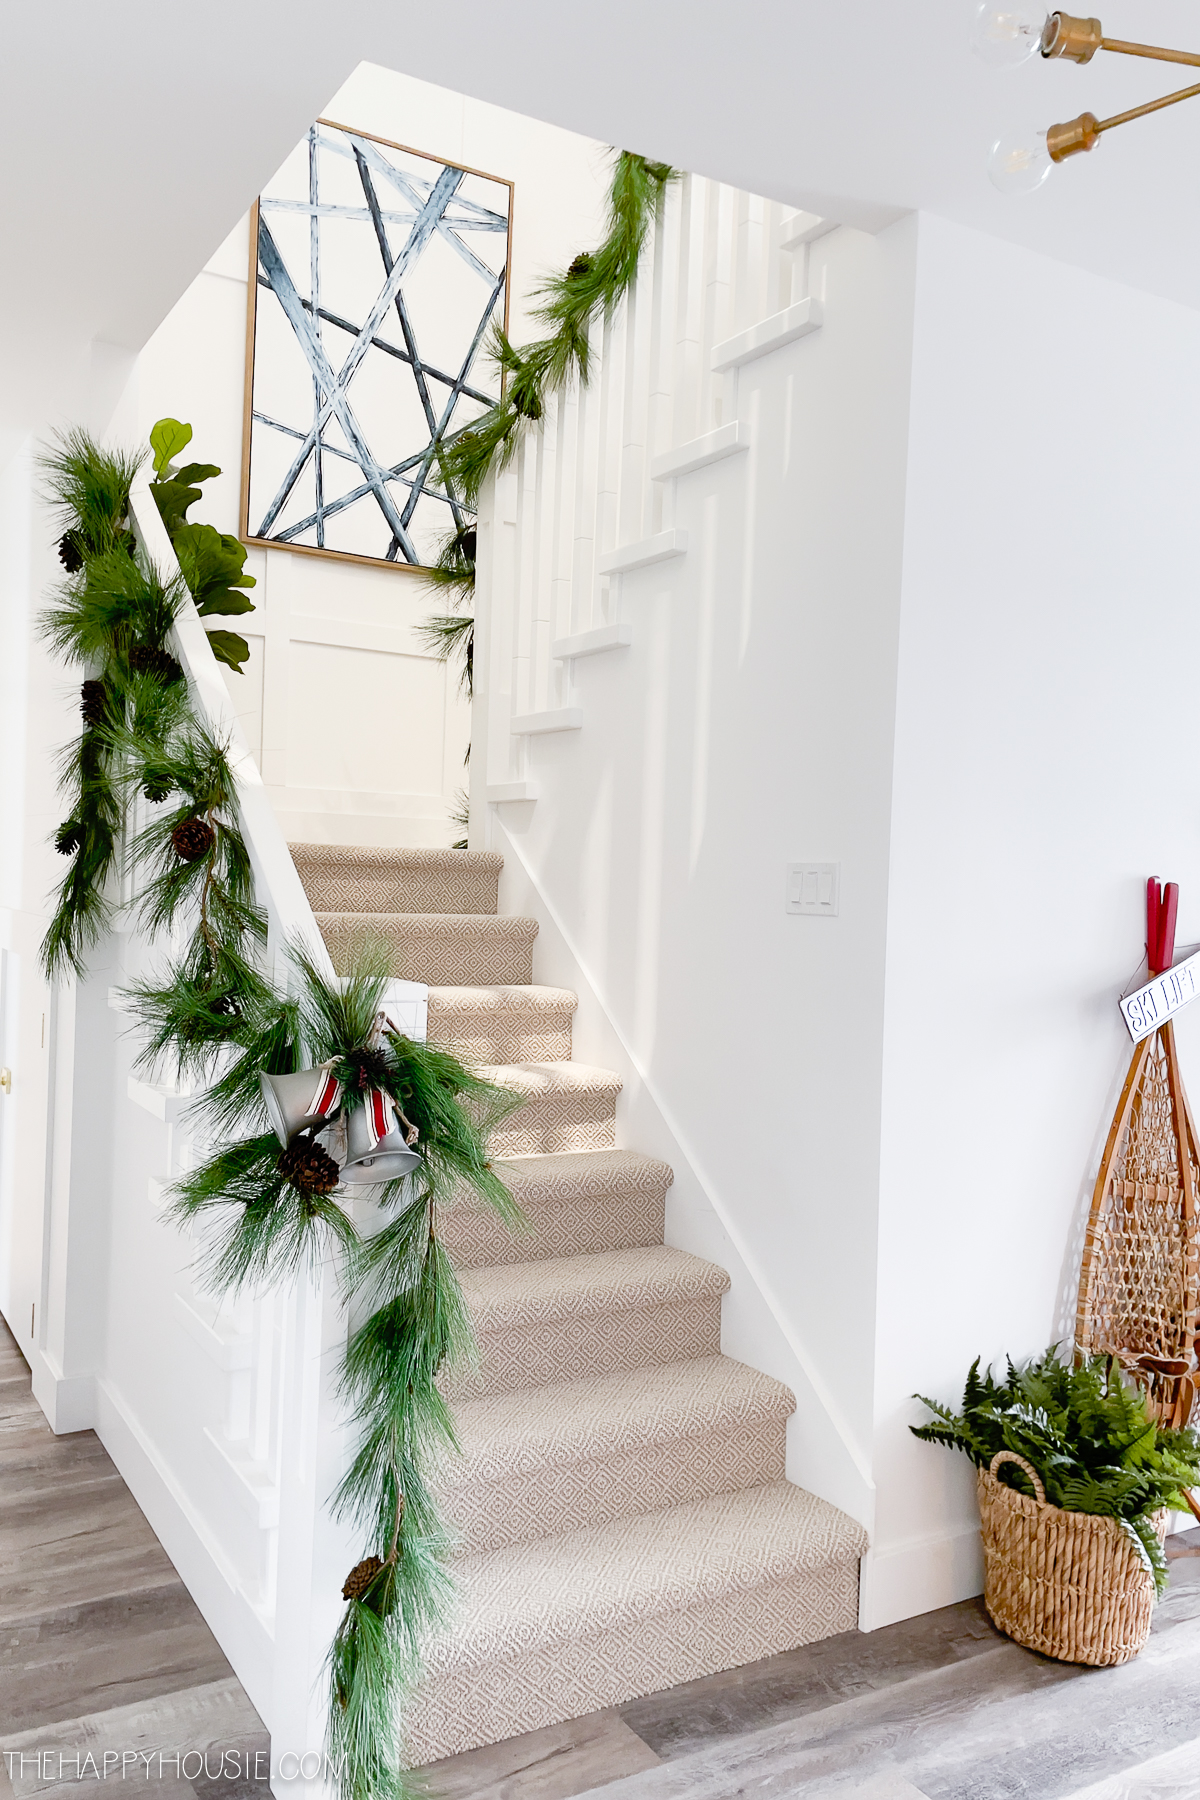 The stairway banister with sprigs of greenery and pine cones.